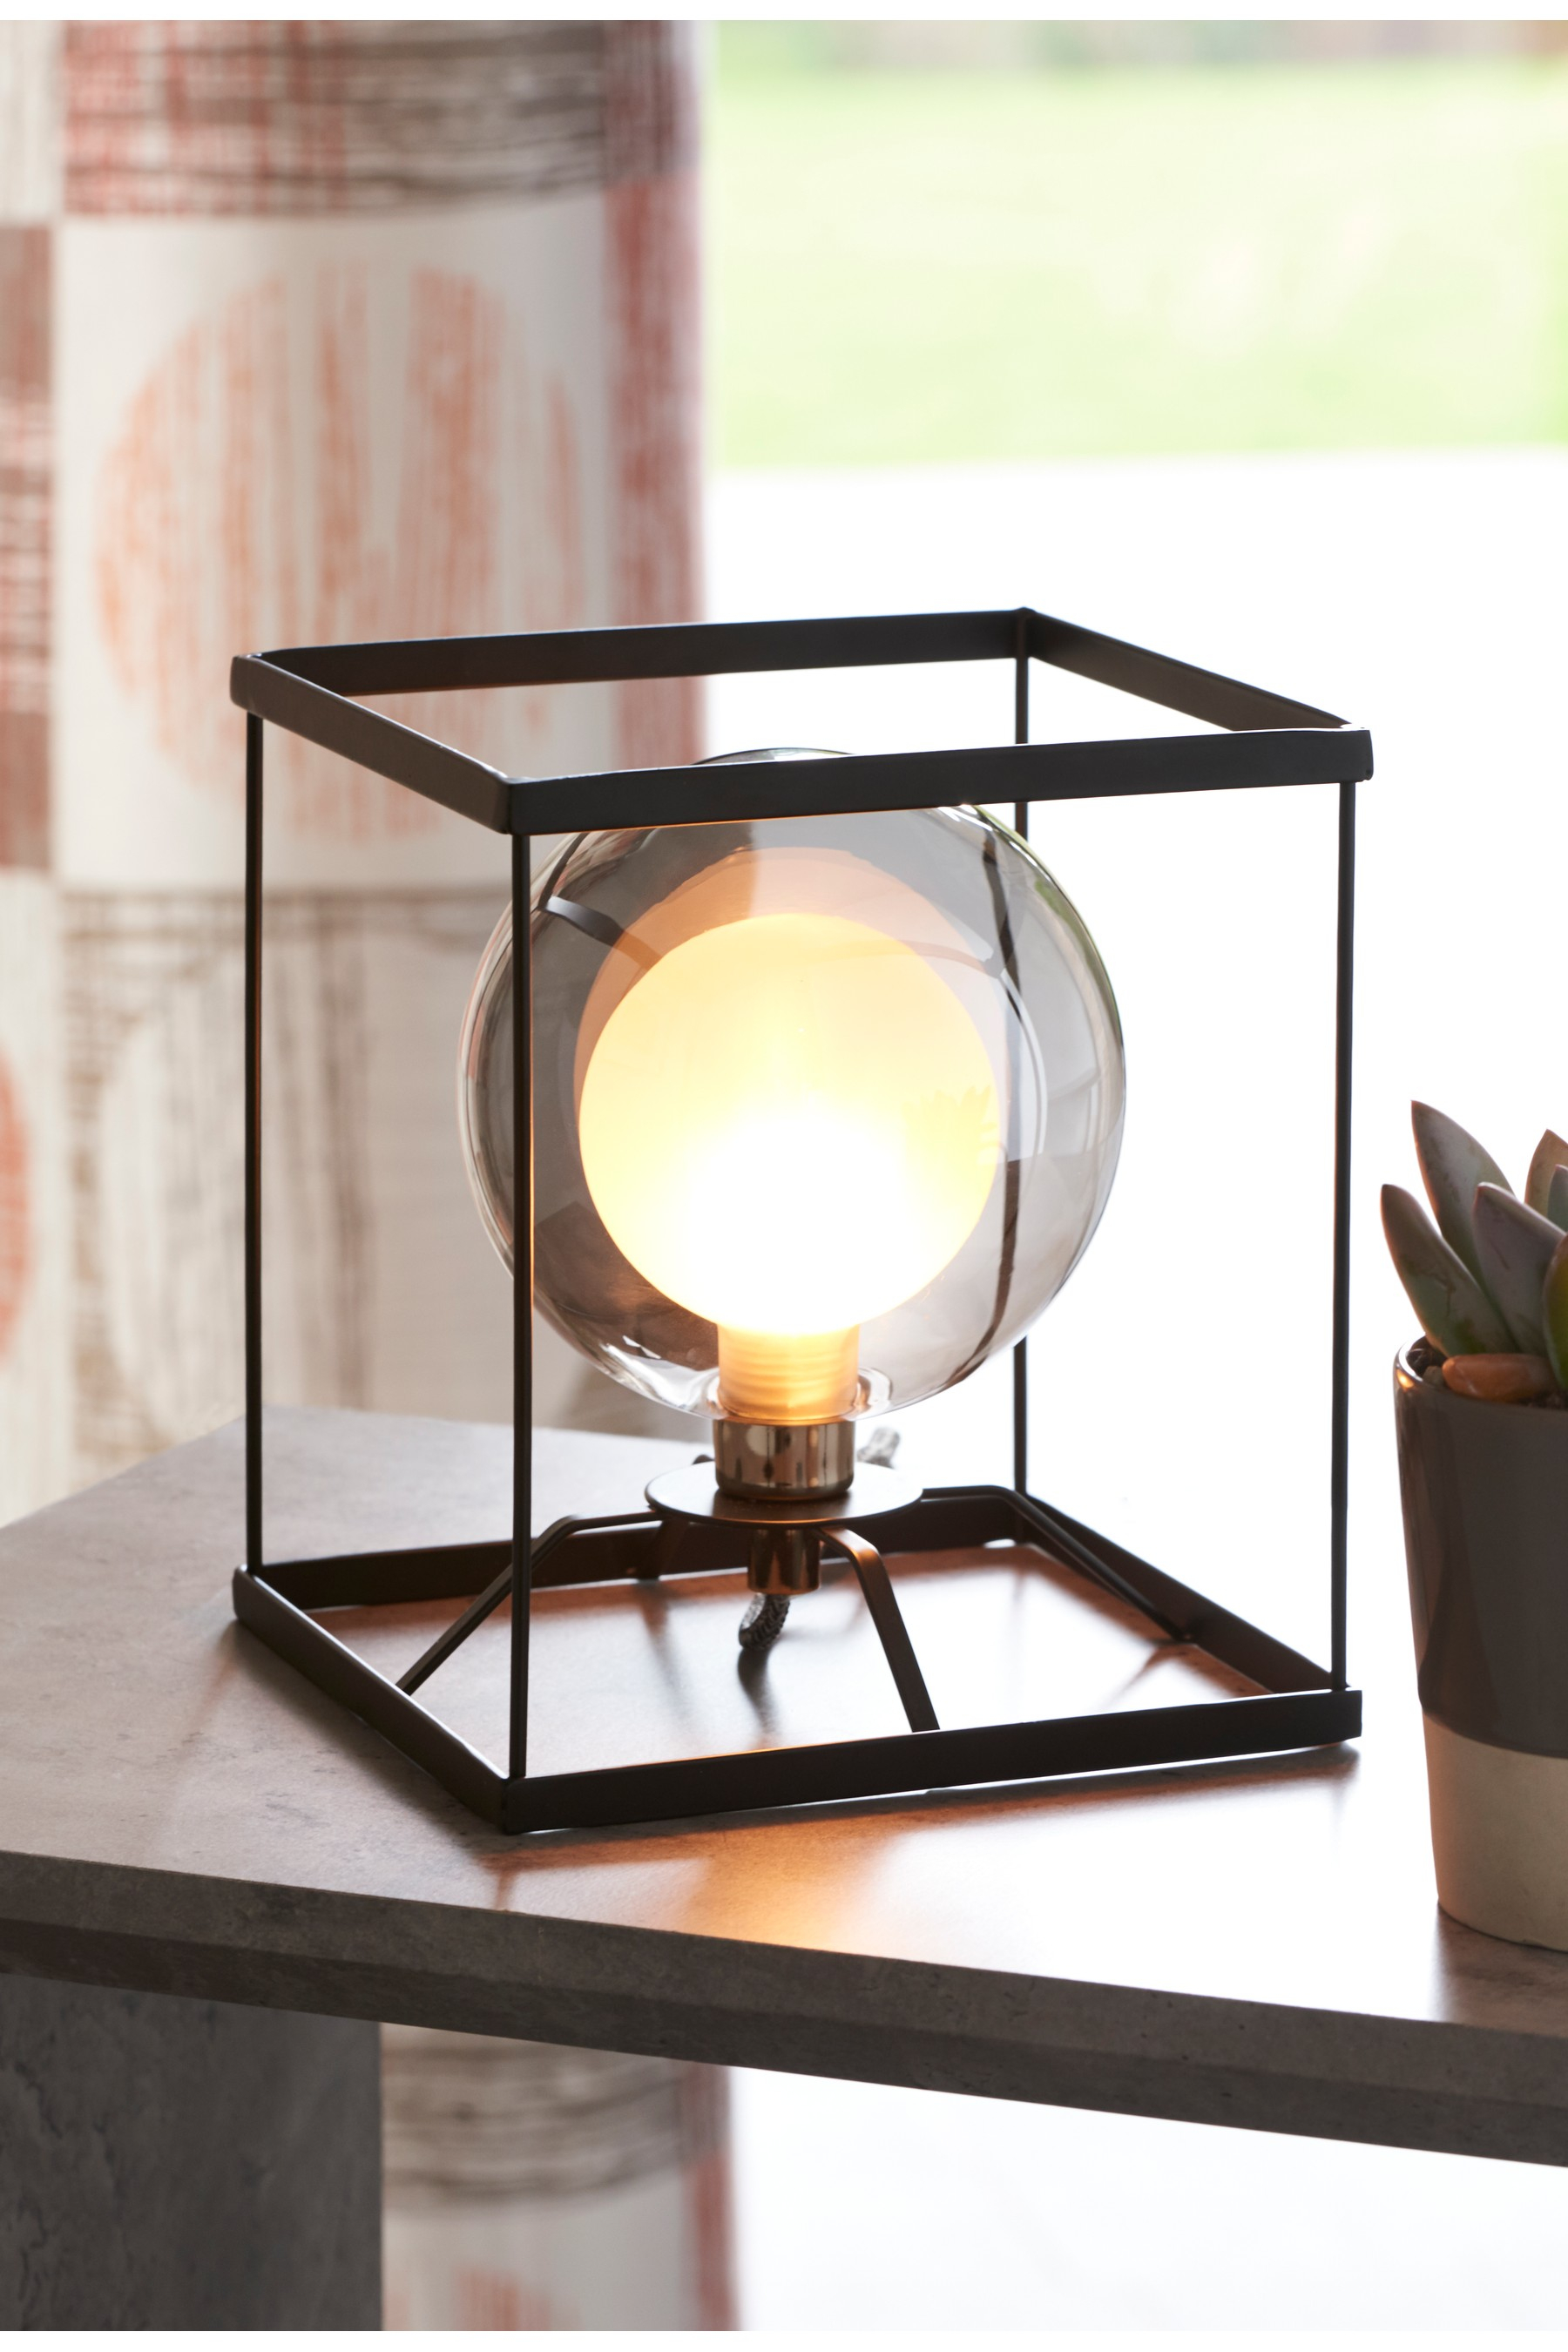 Next Cube Table Lamp Black Products In 2019 Black regarding measurements 1800 X 2700